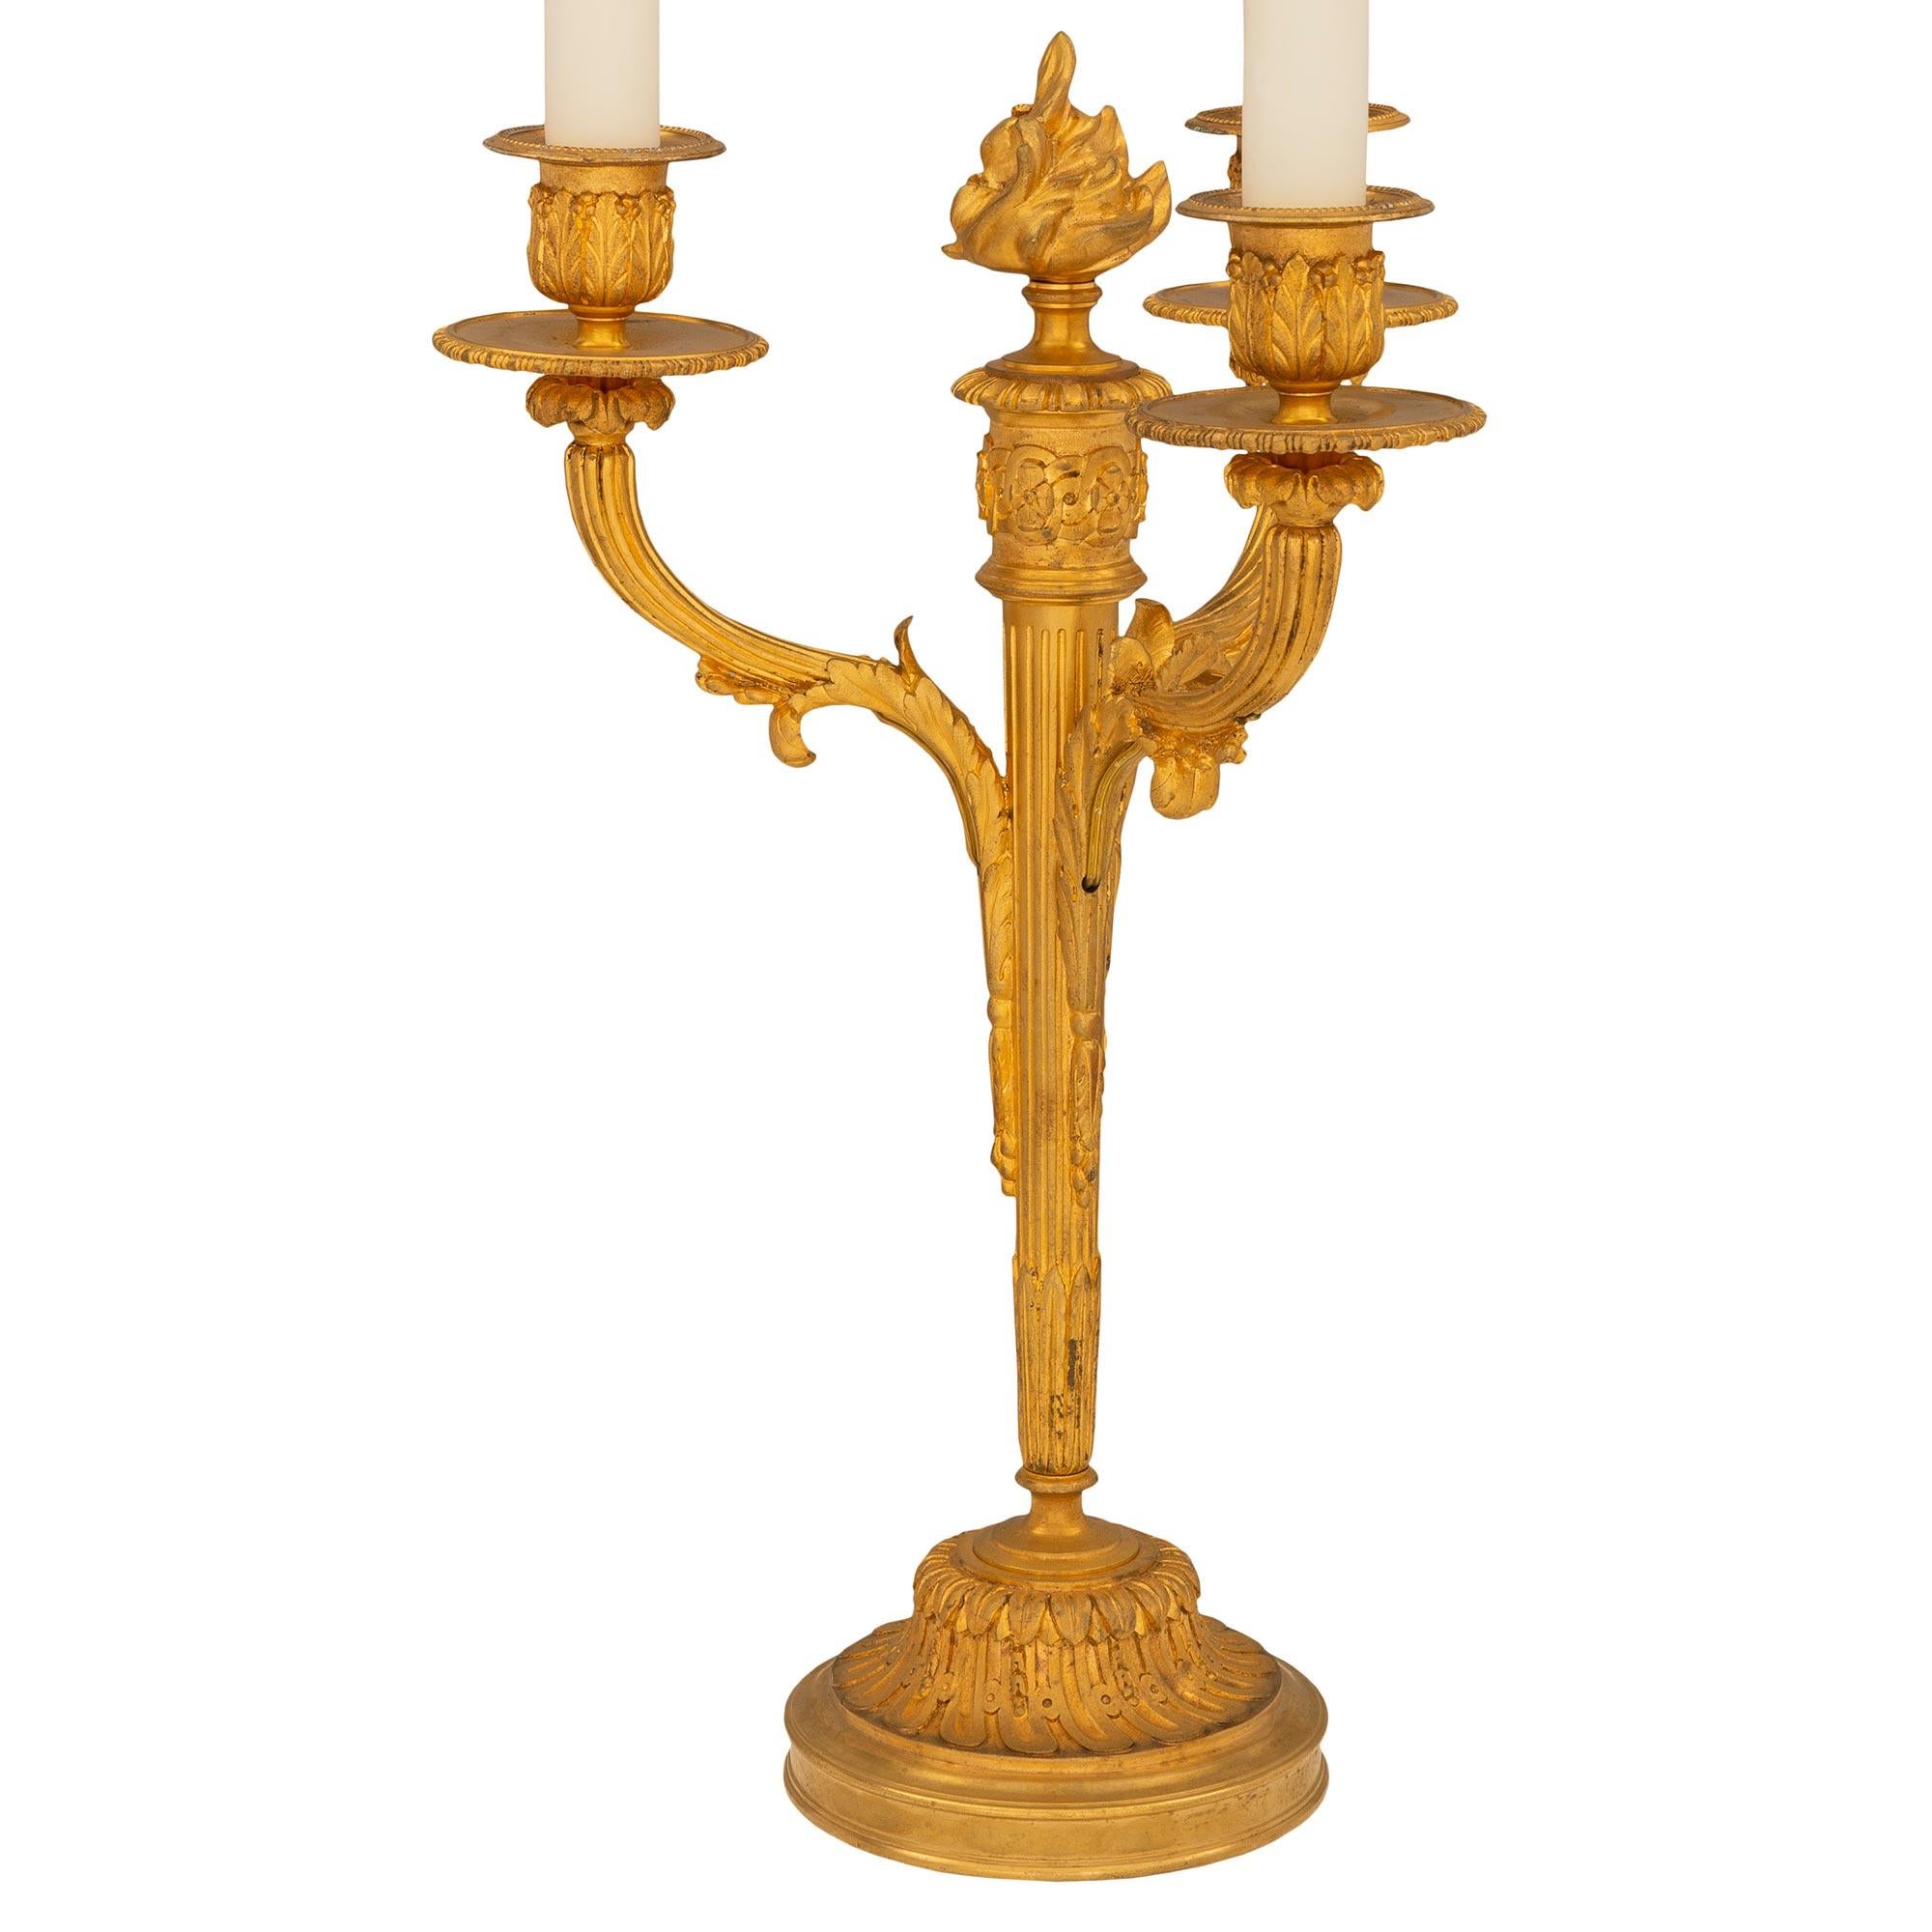 A very attractive pair of French 19th century Louis XVI st. ormolu candelabra lamps. Each three arm lamp is raised by a circular base with a fine mottled border and beautiful richly chased spiral fluted foliate designs. The elegant tapered central